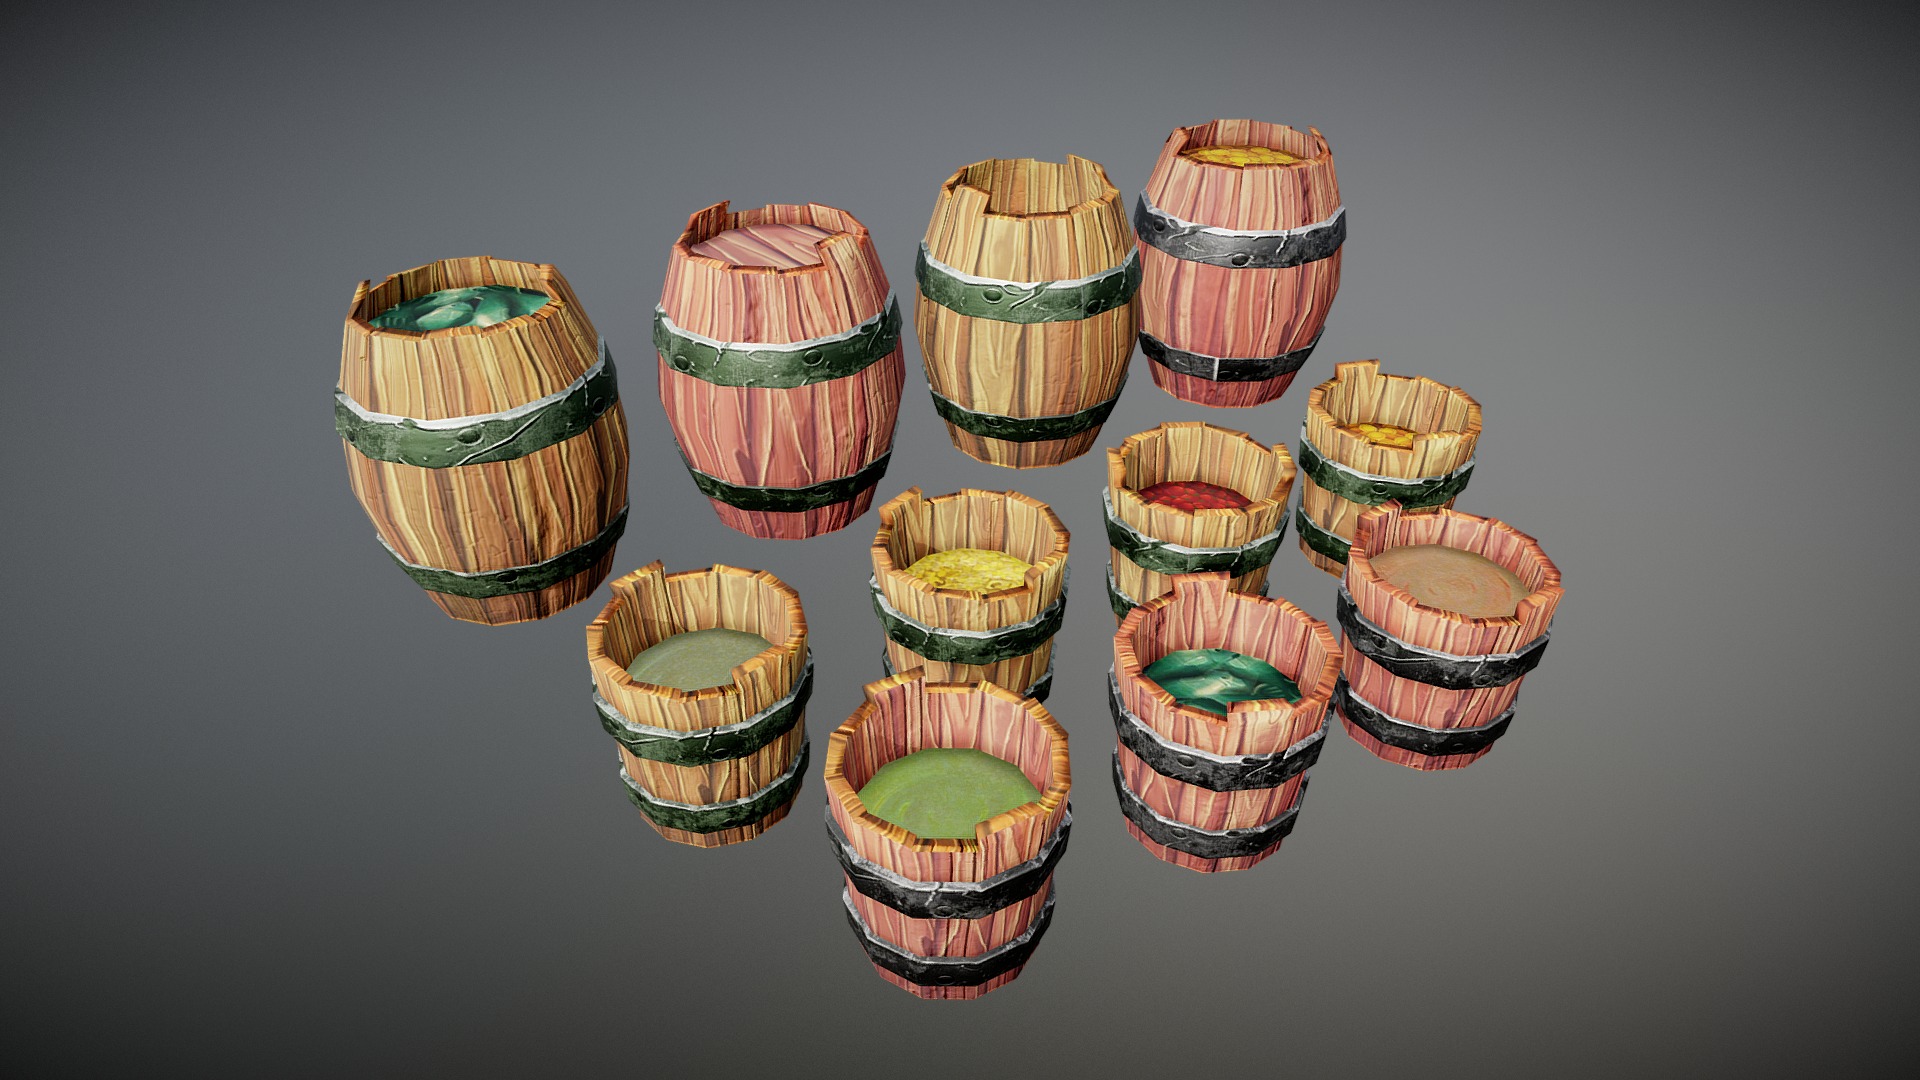 3D model Low Poly barells and buckets set - This is a 3D model of the Low Poly barells and buckets set. The 3D model is about a group of colorful baskets.